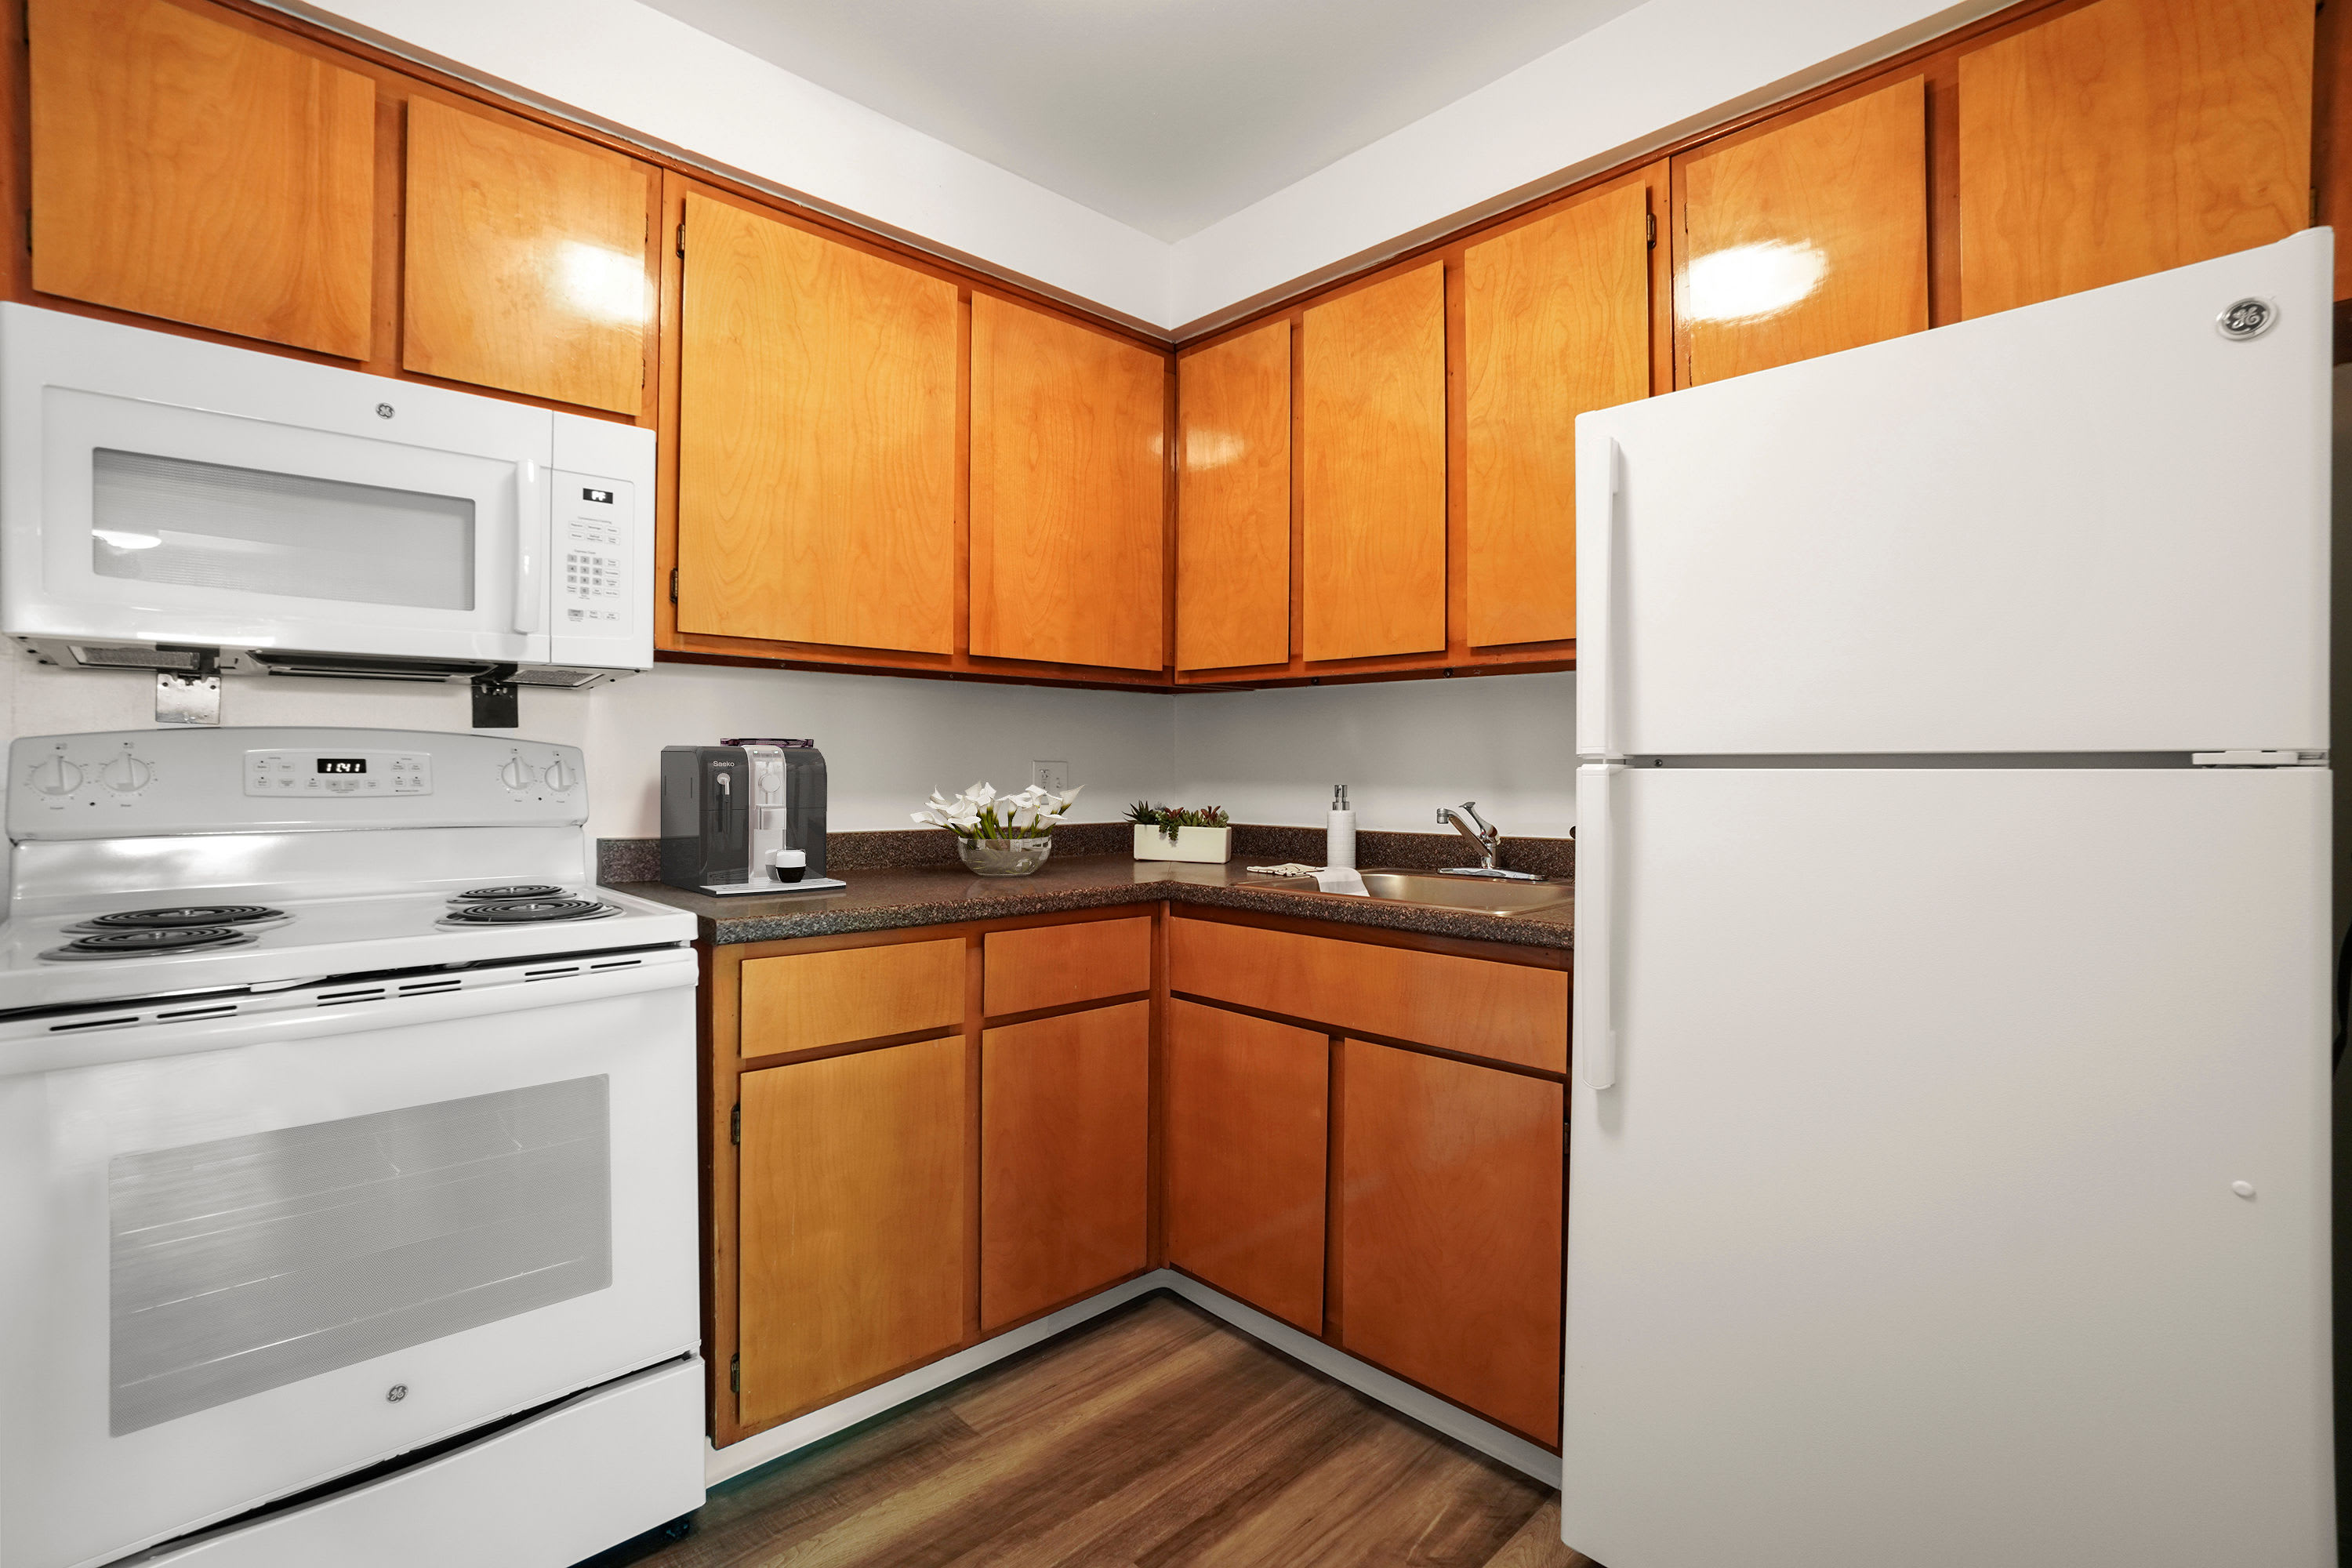 Stony Brook Commons offers a Kitchen in Roslindale, Massachusetts